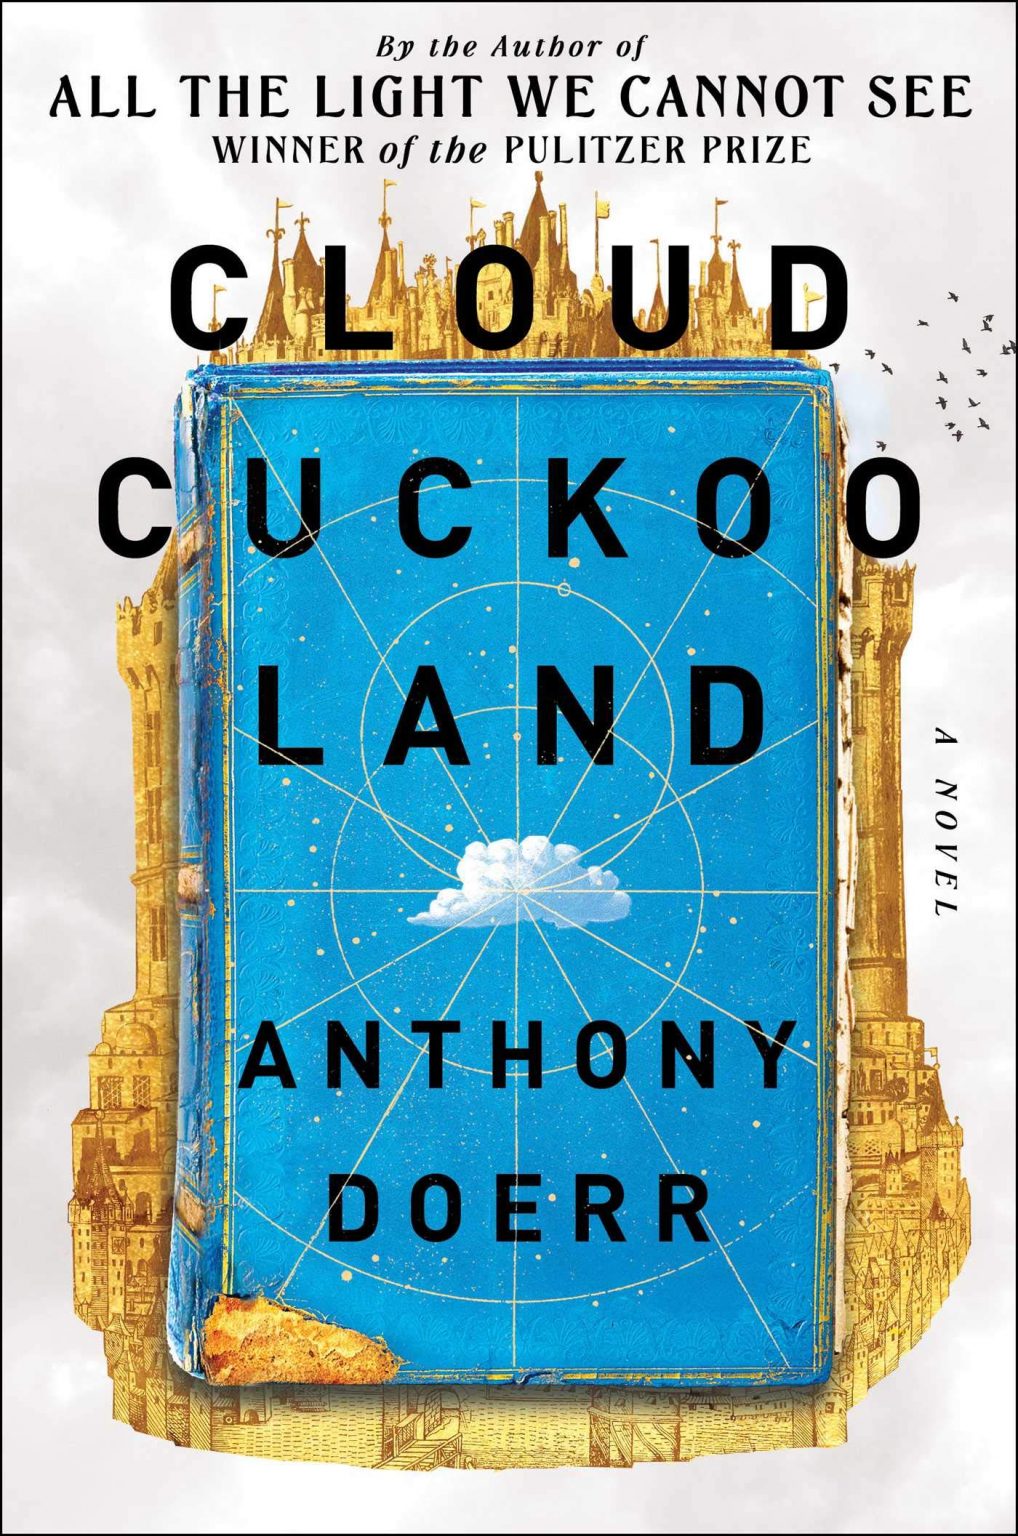 Anthony Doerr “Cloud Cuckoo Land” Book Discussion – Book Signing Central